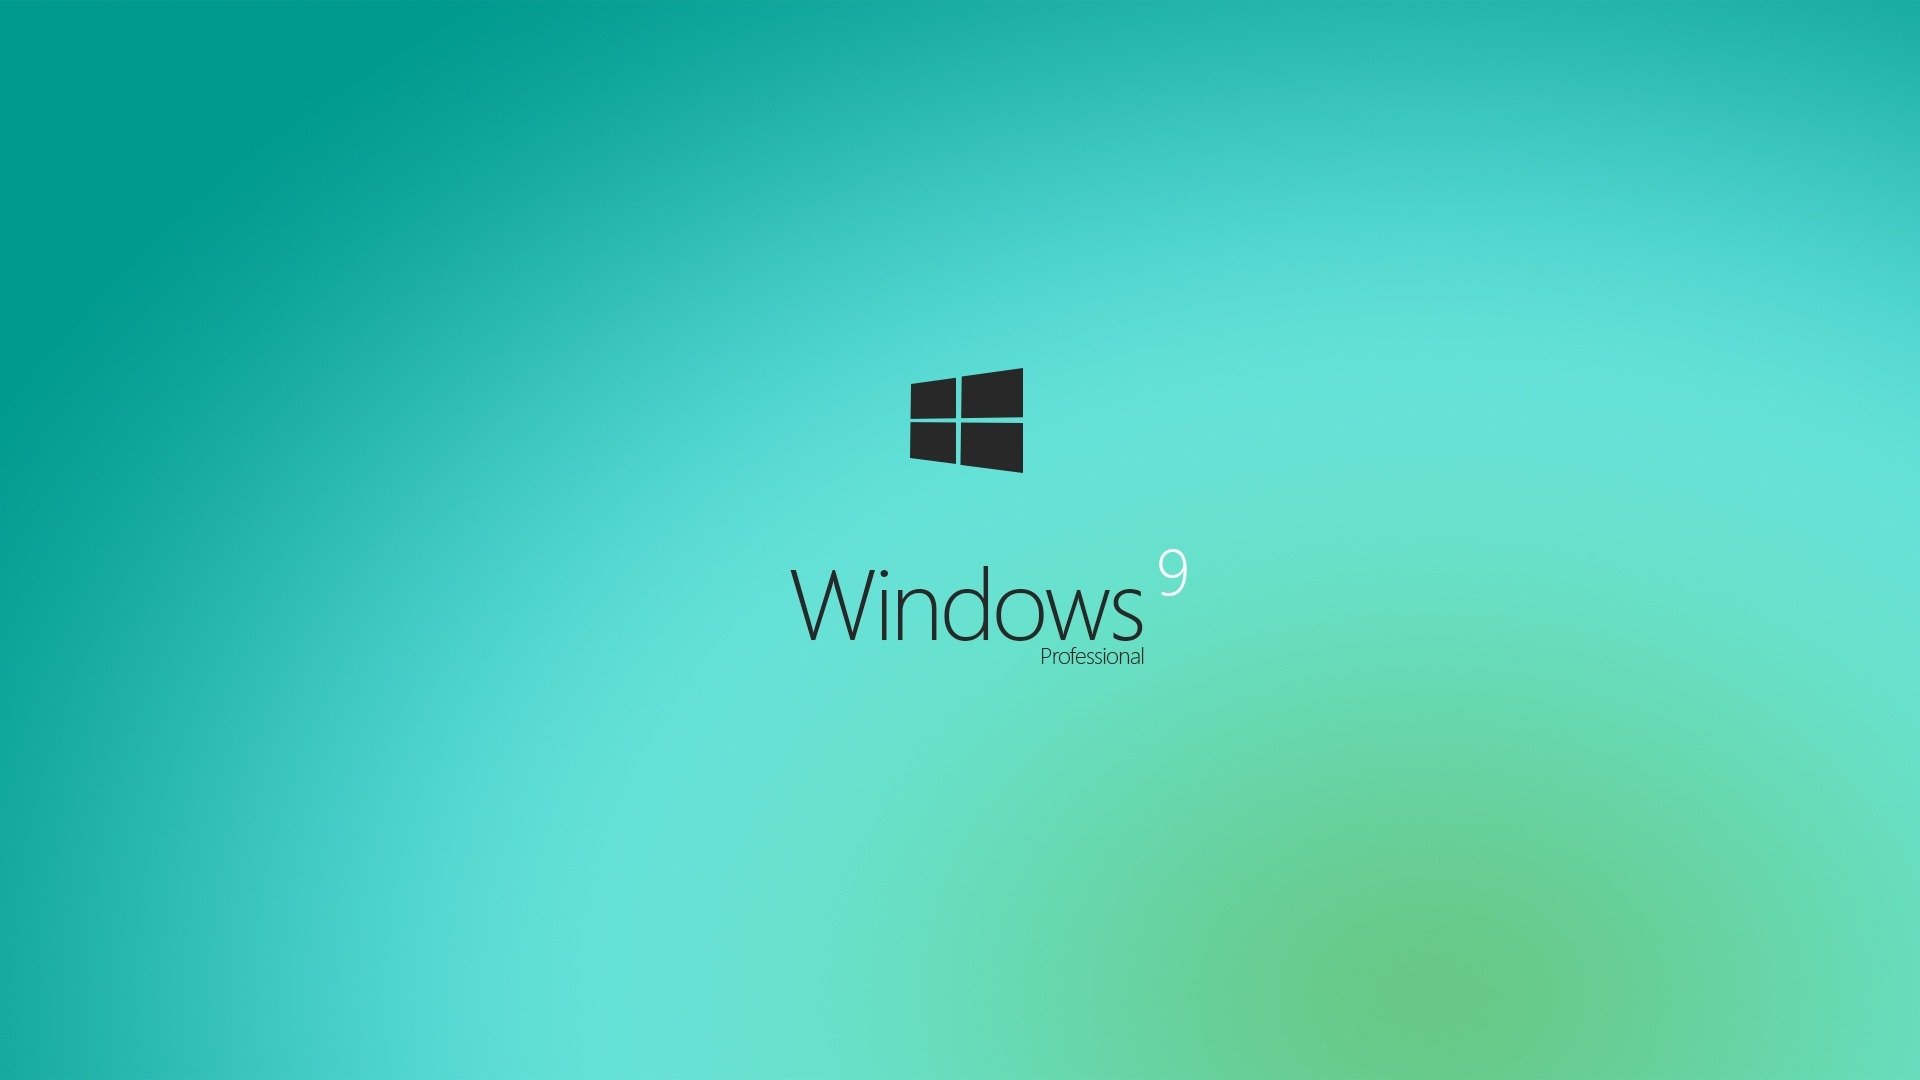 10 Windows 9 HD Wallpapers and Backgrounds